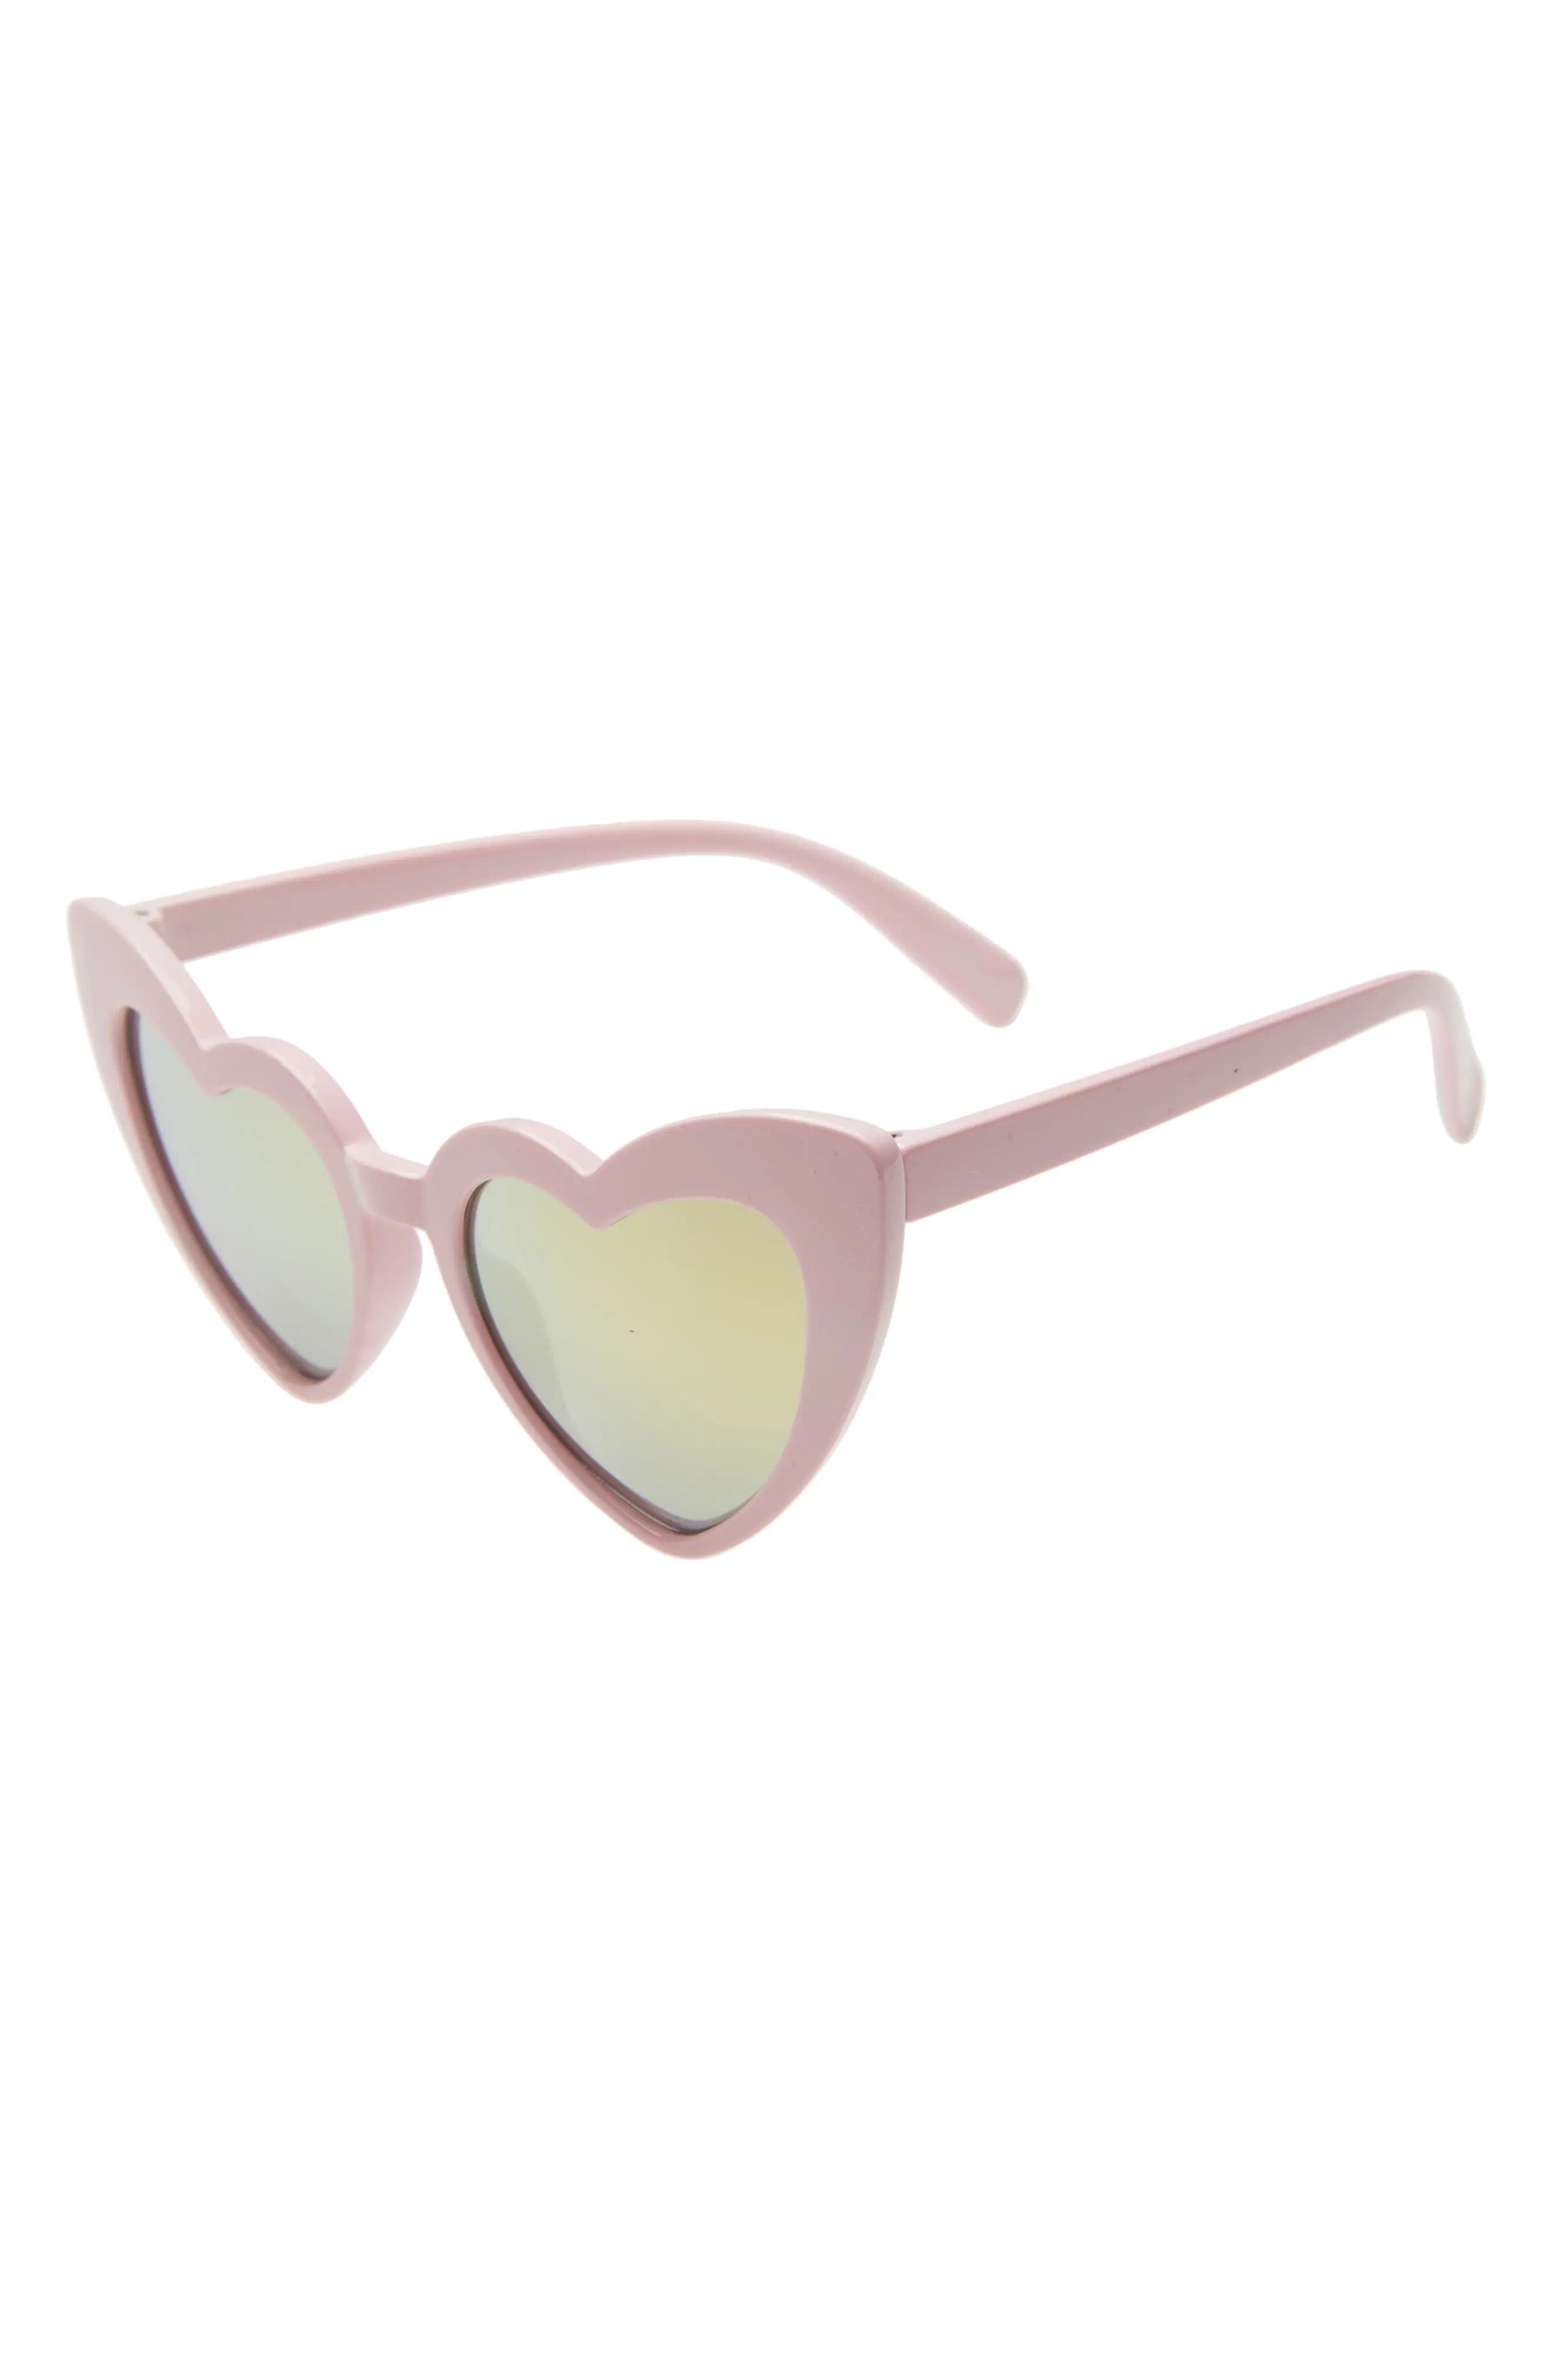 Rad + Refined Heart Sunglasses in Pink/Mirror at Nordstrom | Nordstrom